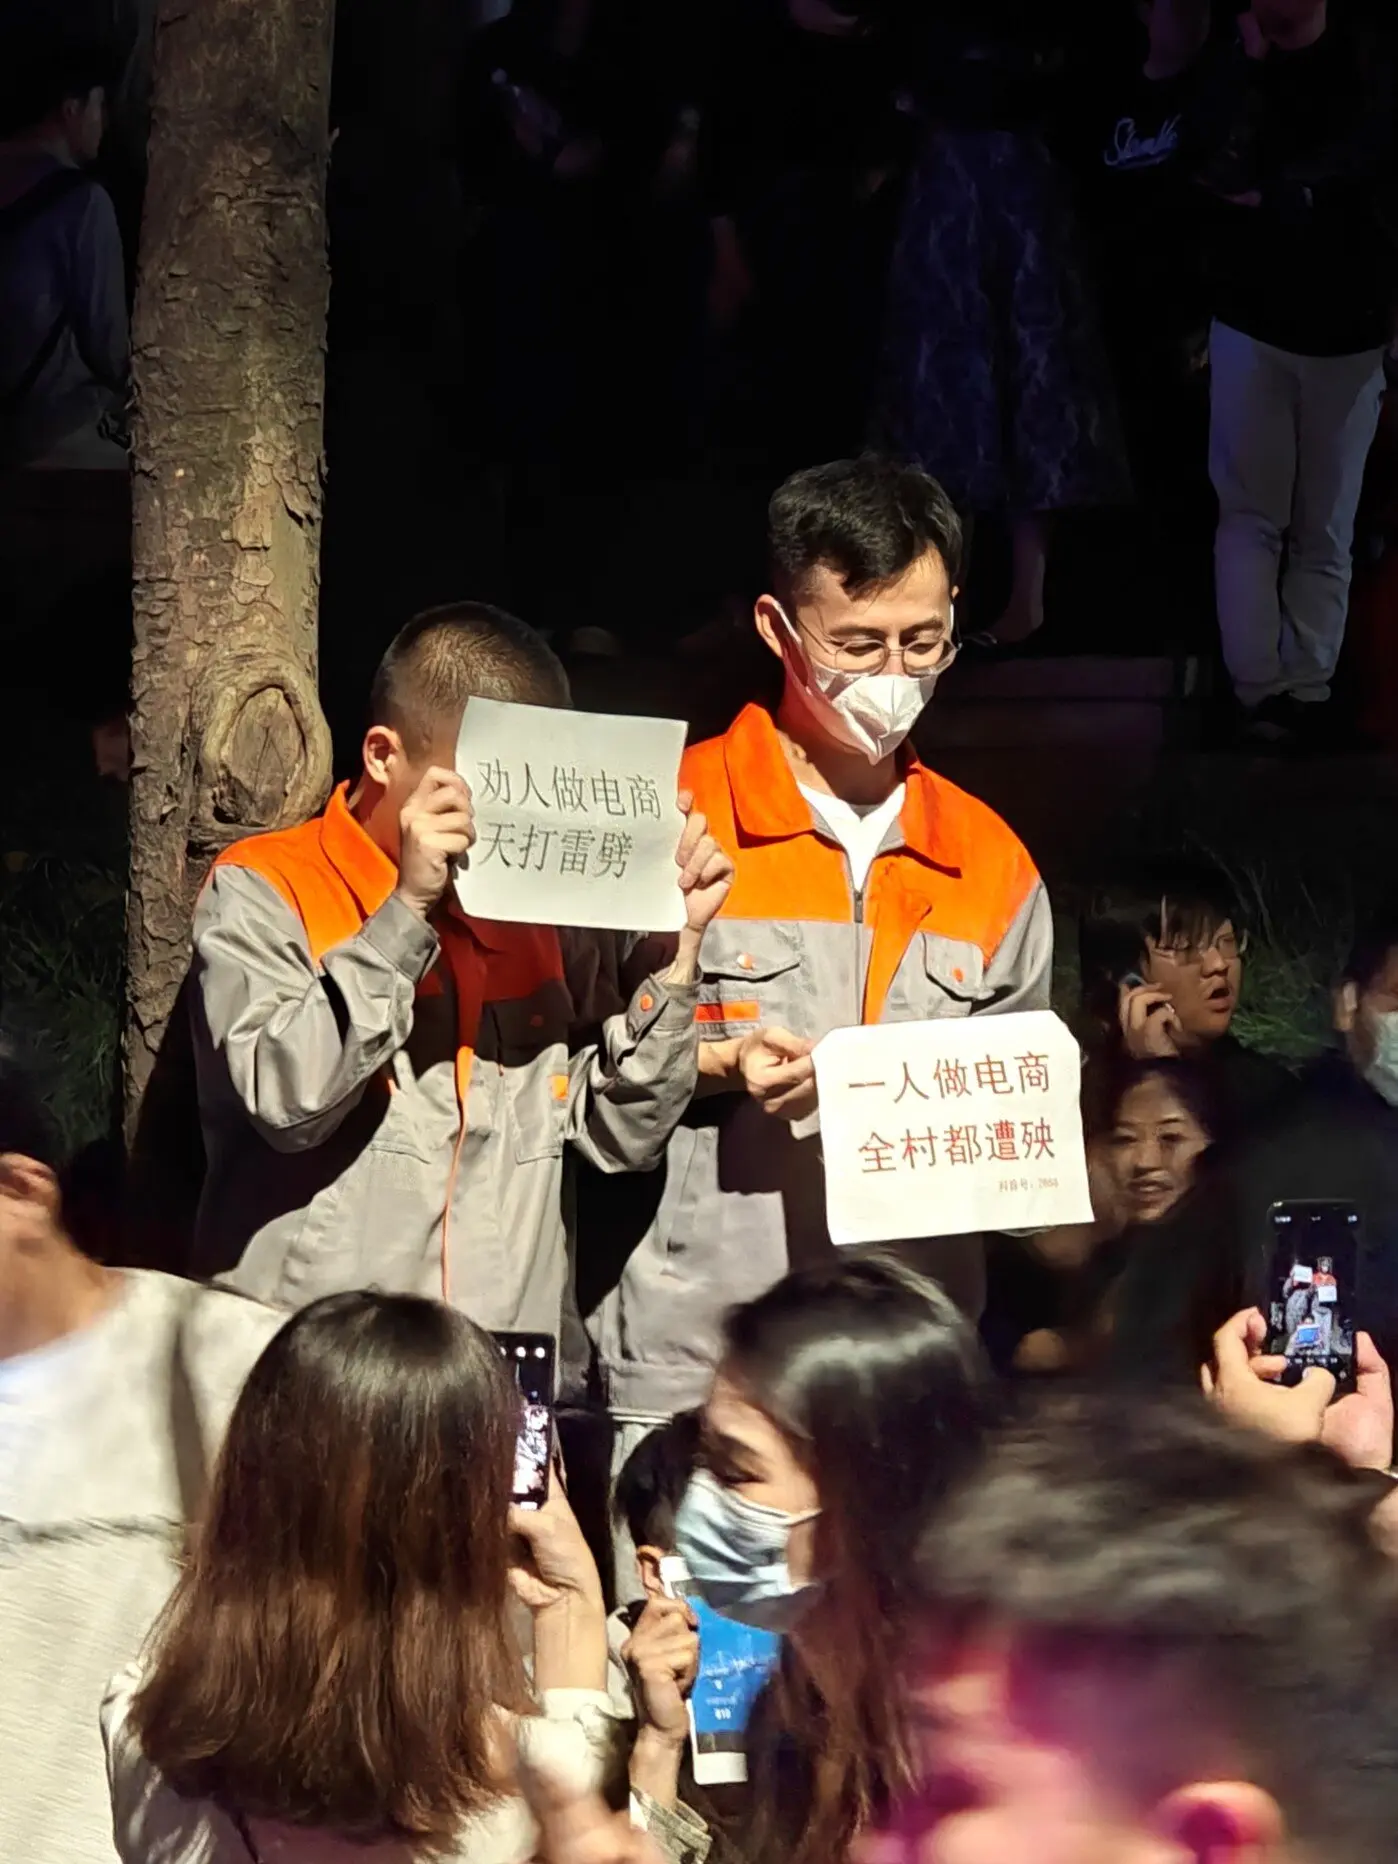 Two men dressed as e-commerce workers standing in front of a crowd holding signs.